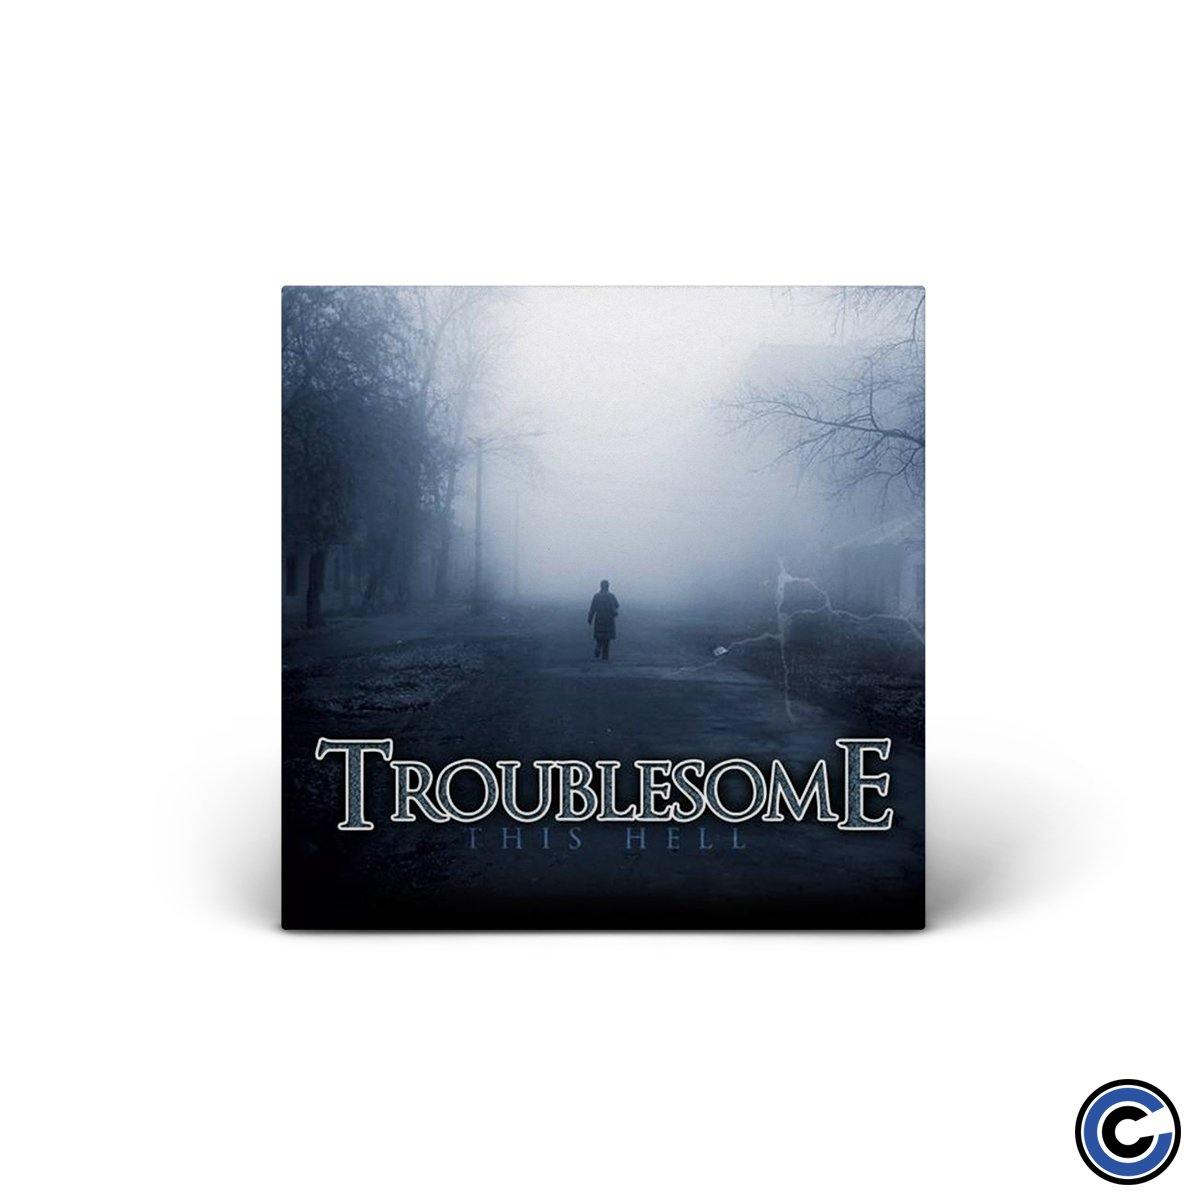 Buy – Troublesome "This Hell" 7" – Band & Music Merch – Cold Cuts Merch